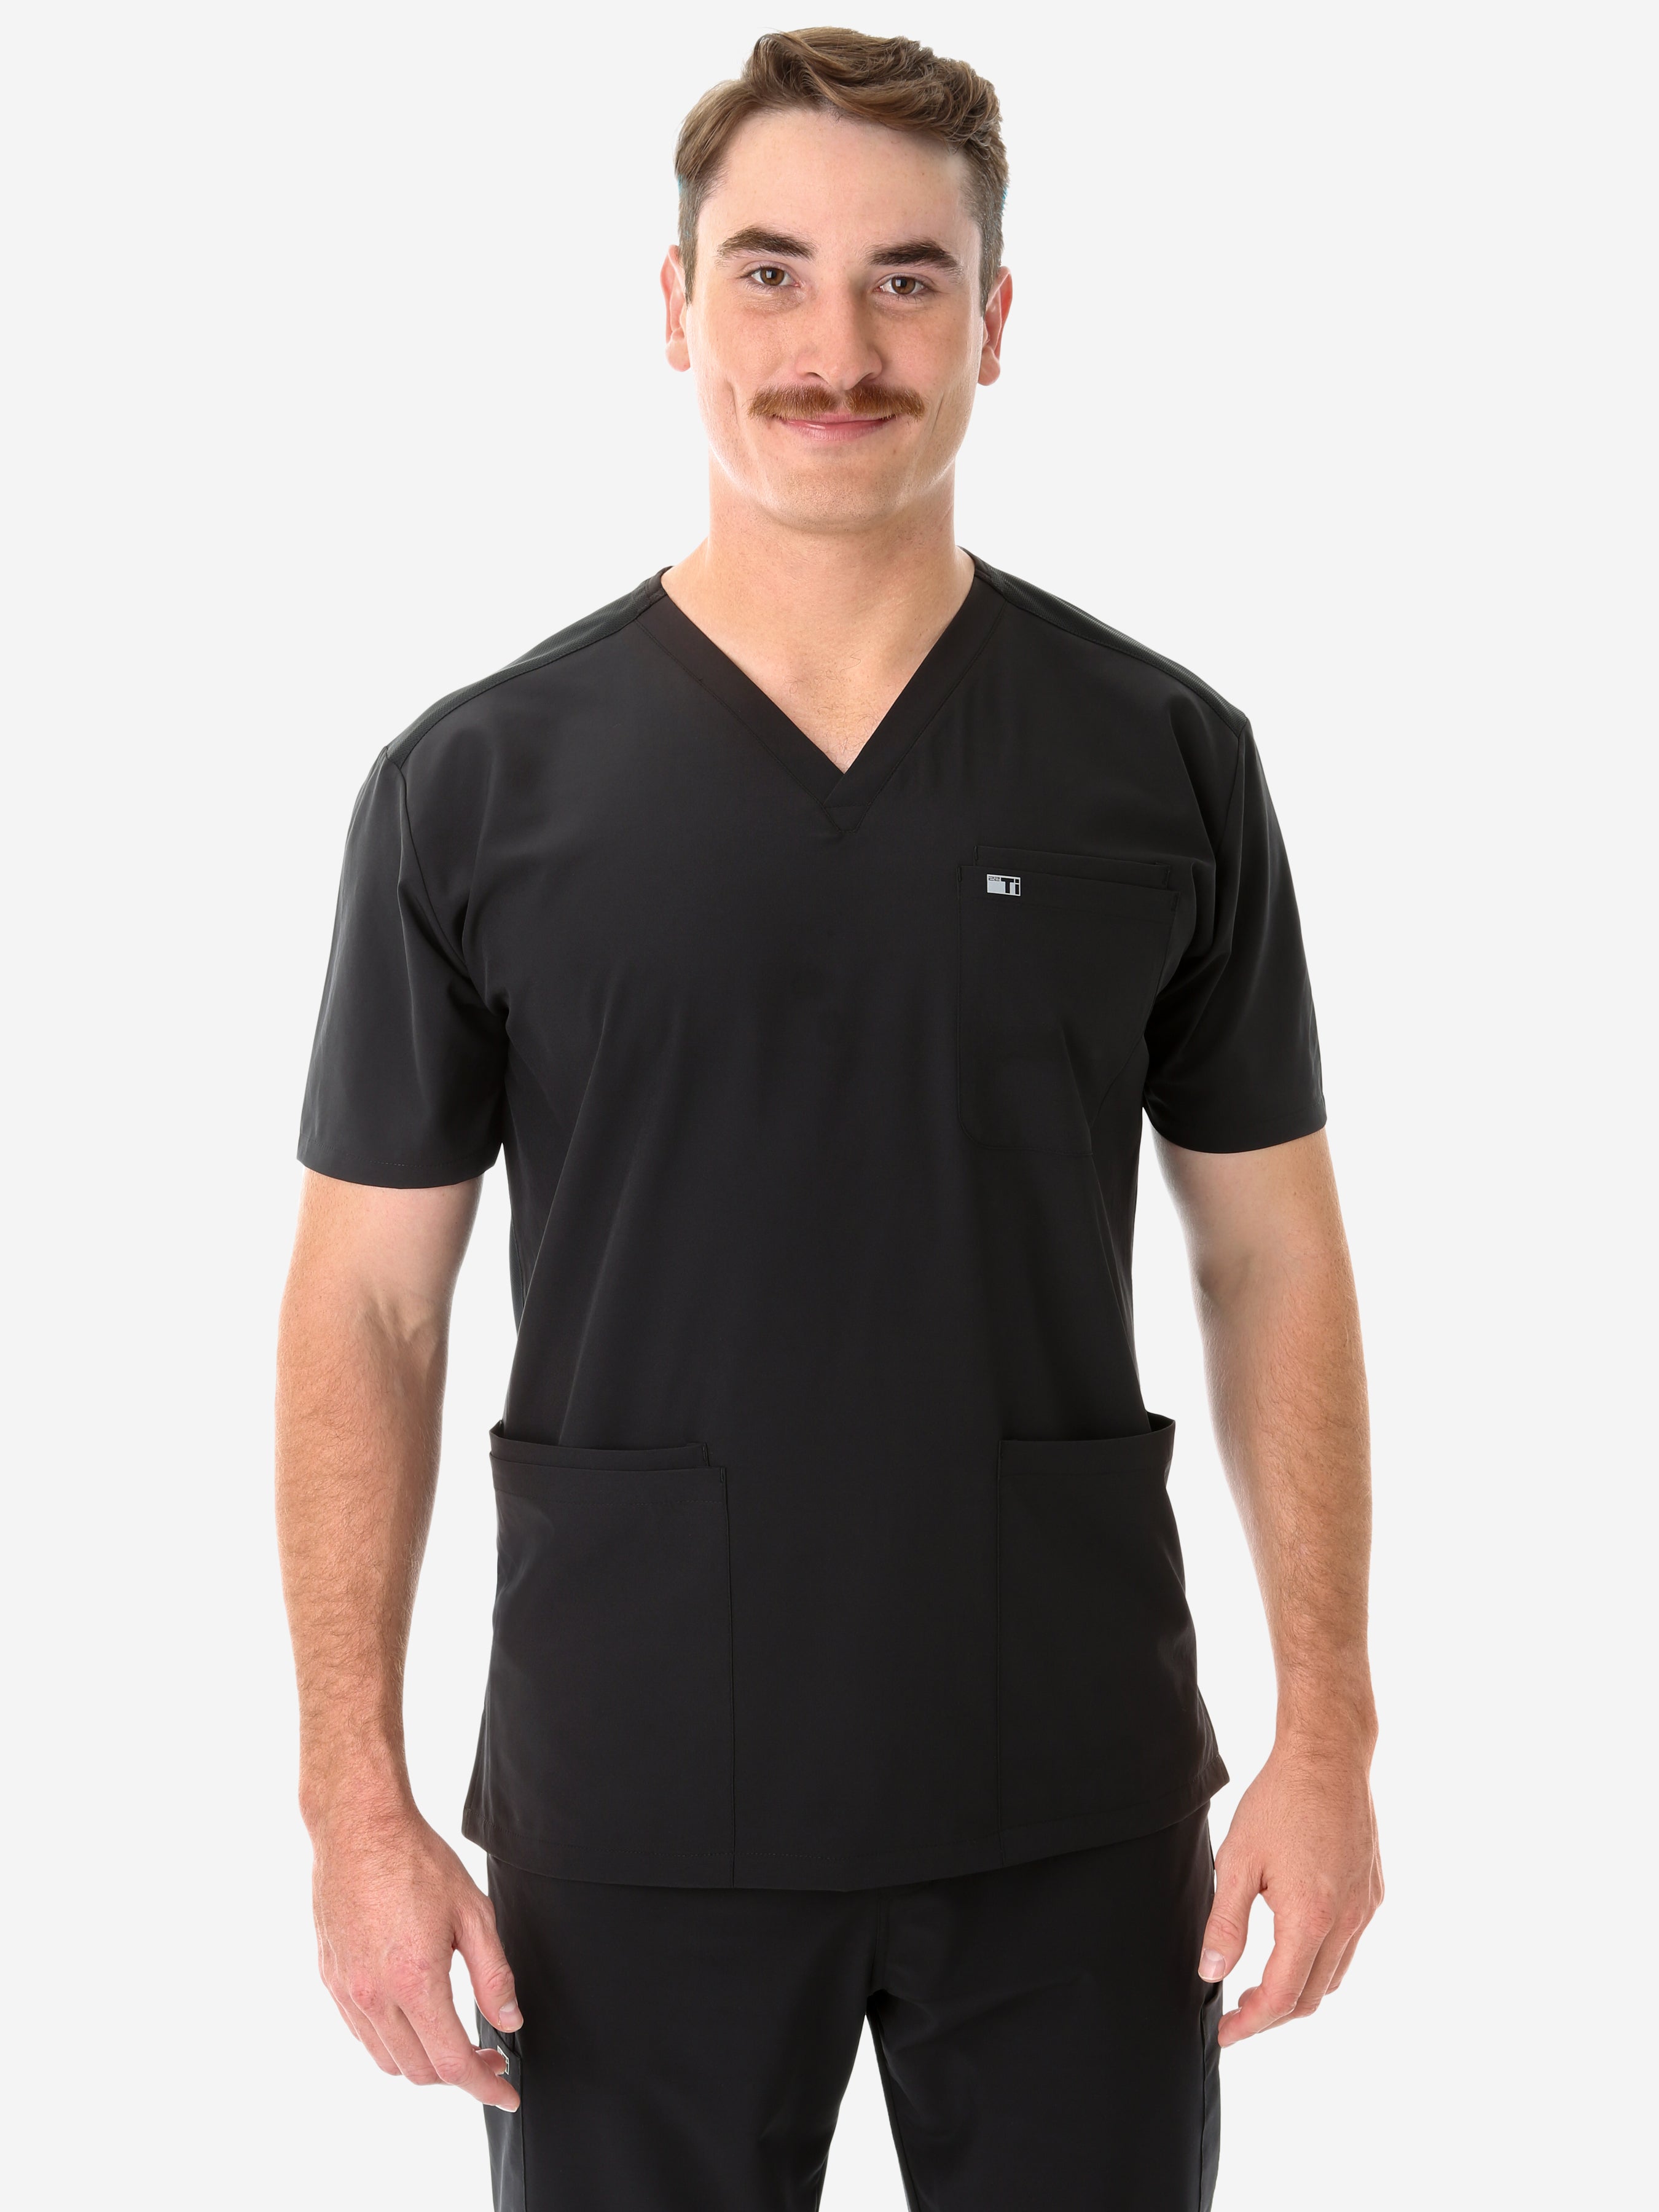 Men's Real Black Five-Pocket Scrub Top Only Front View